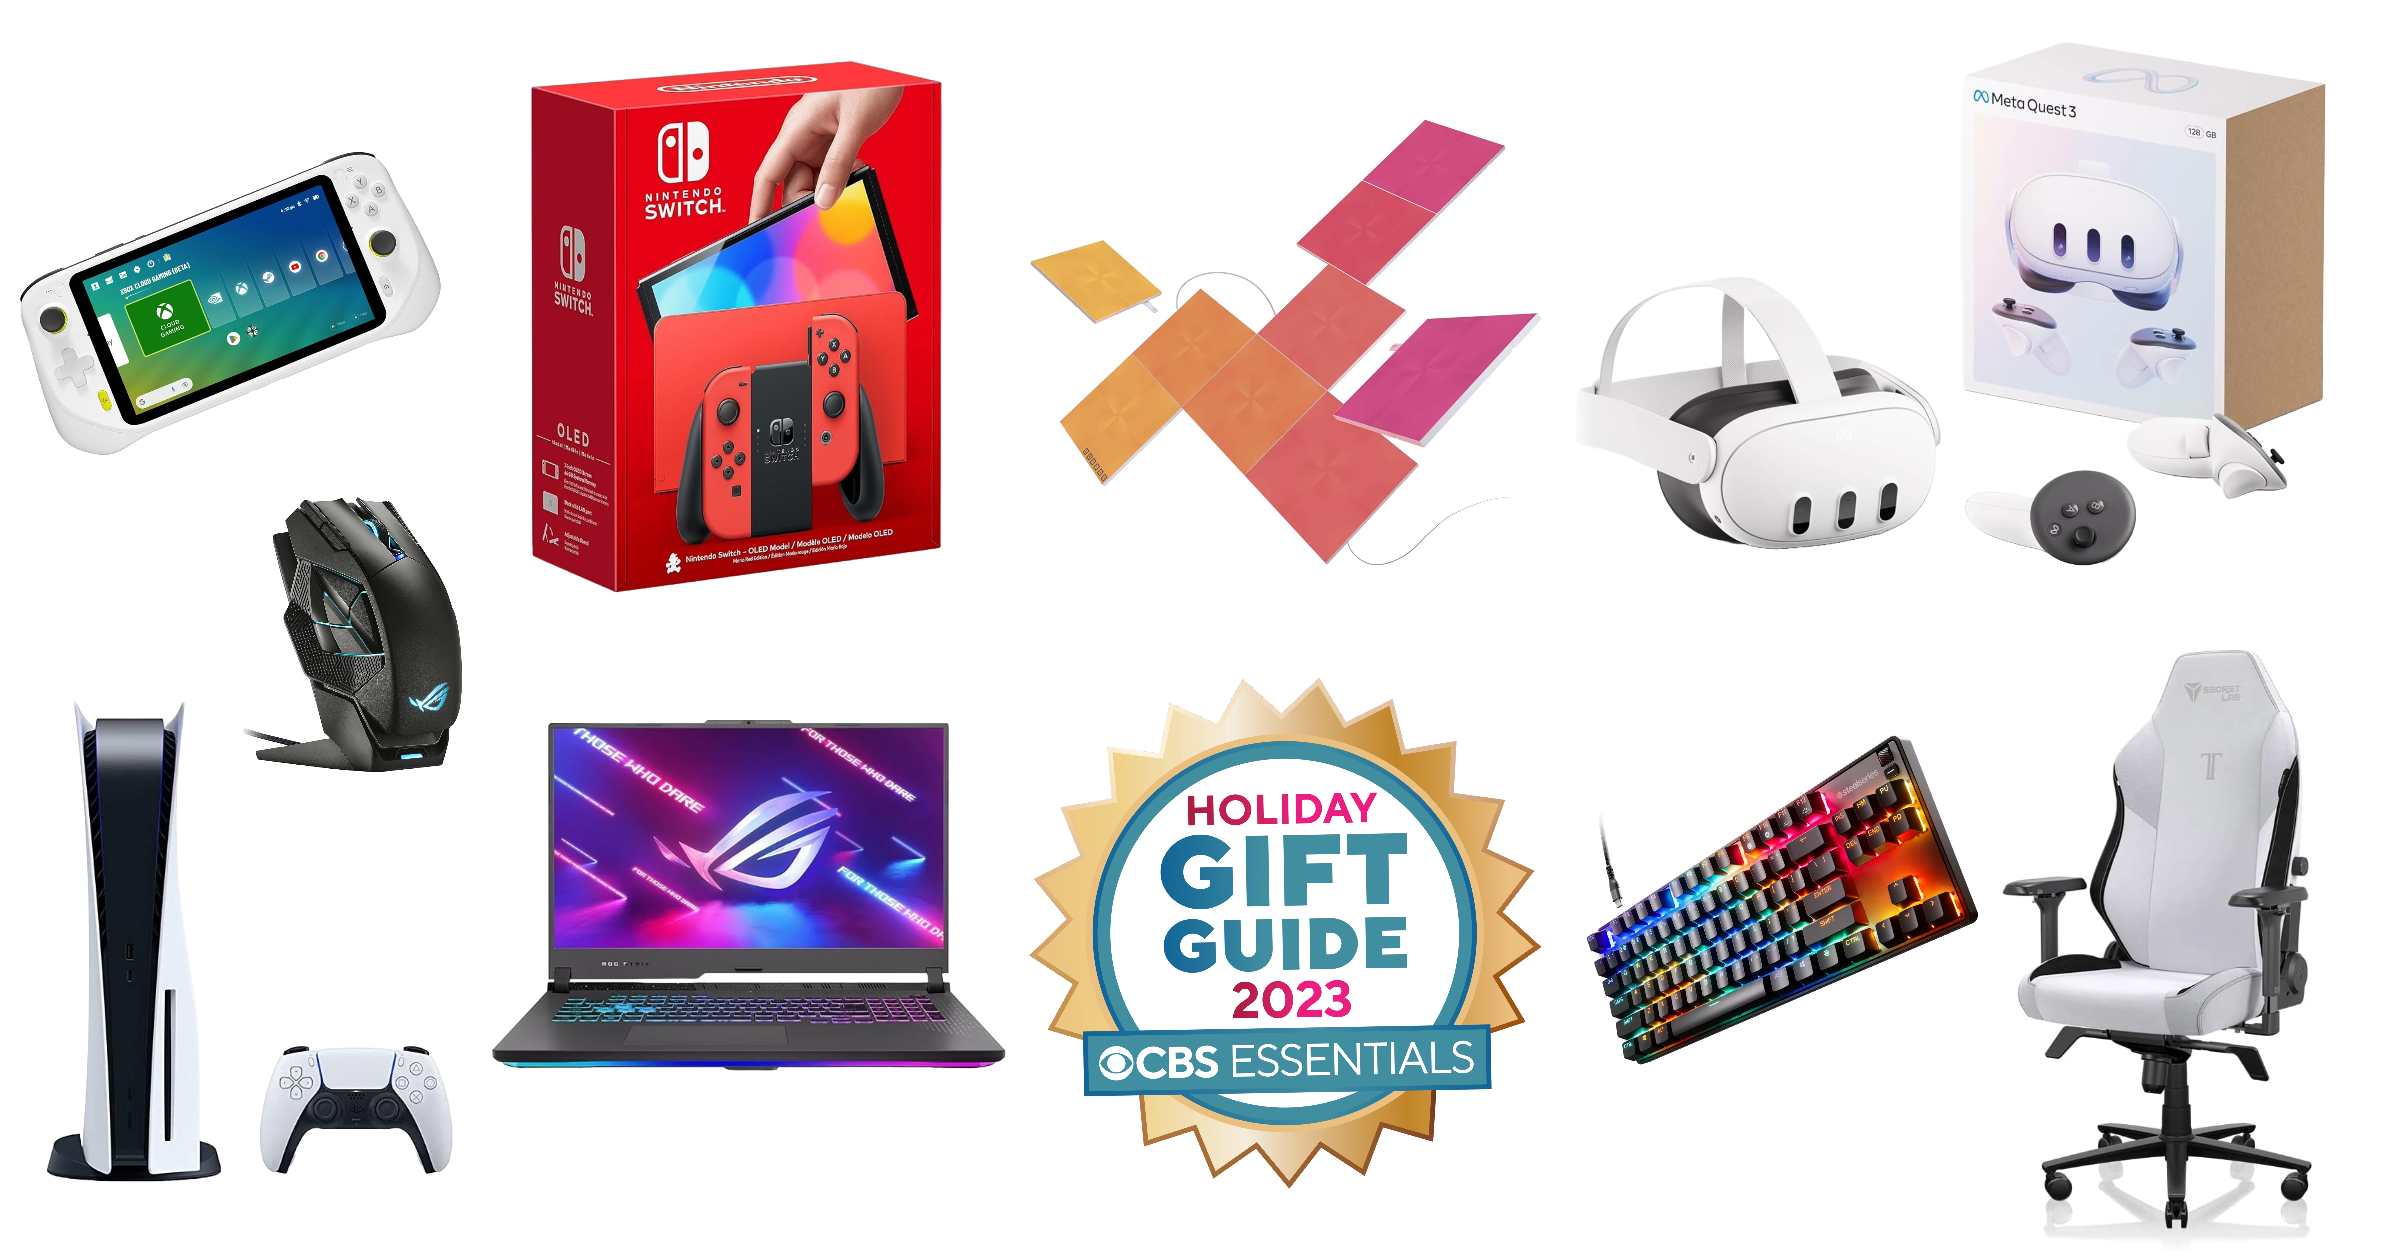 22 gaming gift ideas: What to get gamers in 2023